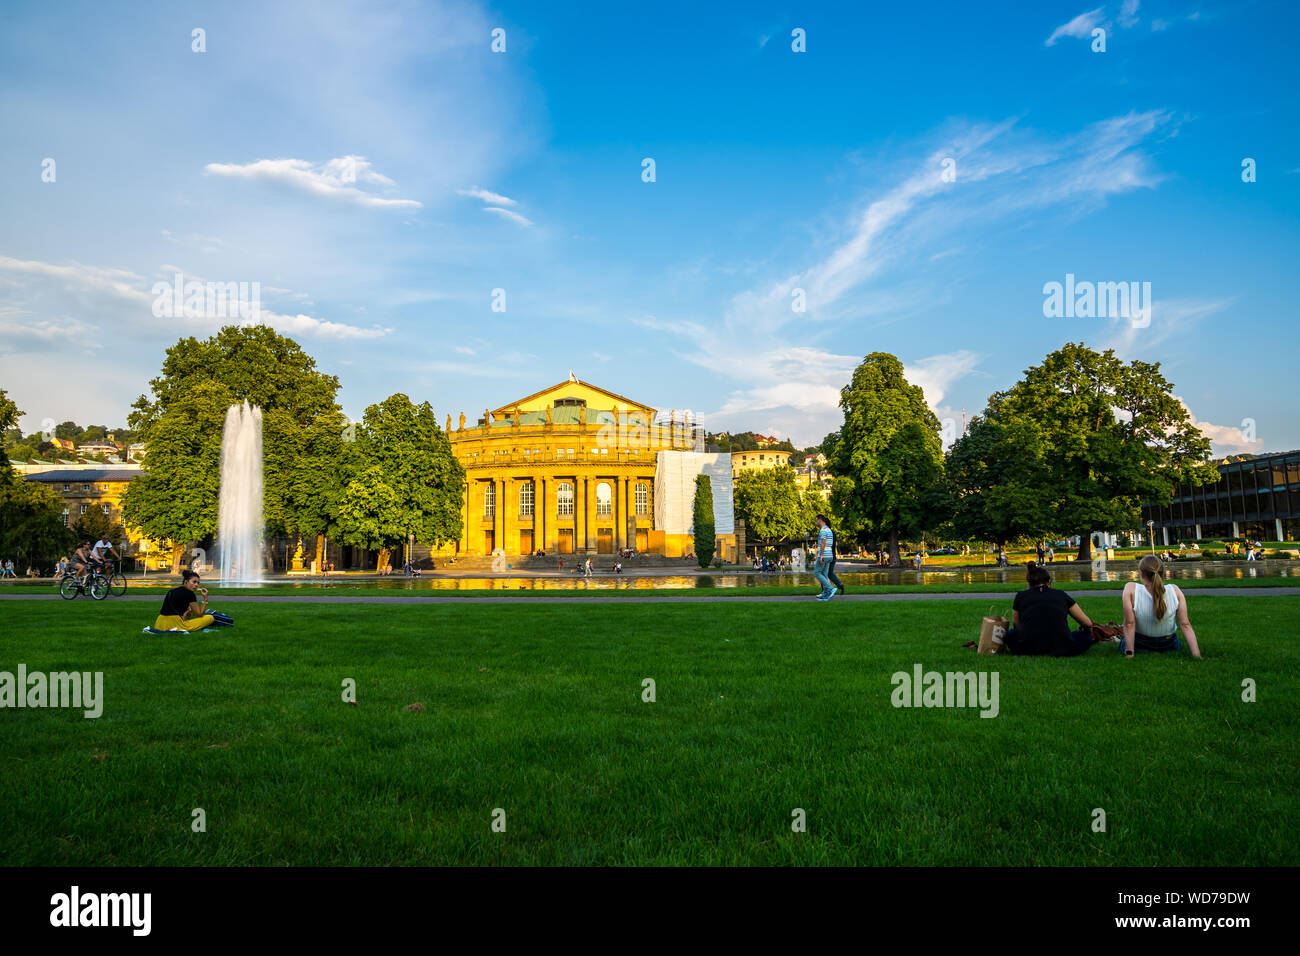 Stuttgart, Germany, August 25, 2019, People enjoy relaxing on green grass meadow in downtown stuttgart, palace garden, with view to ancient opera hous Stock Photo